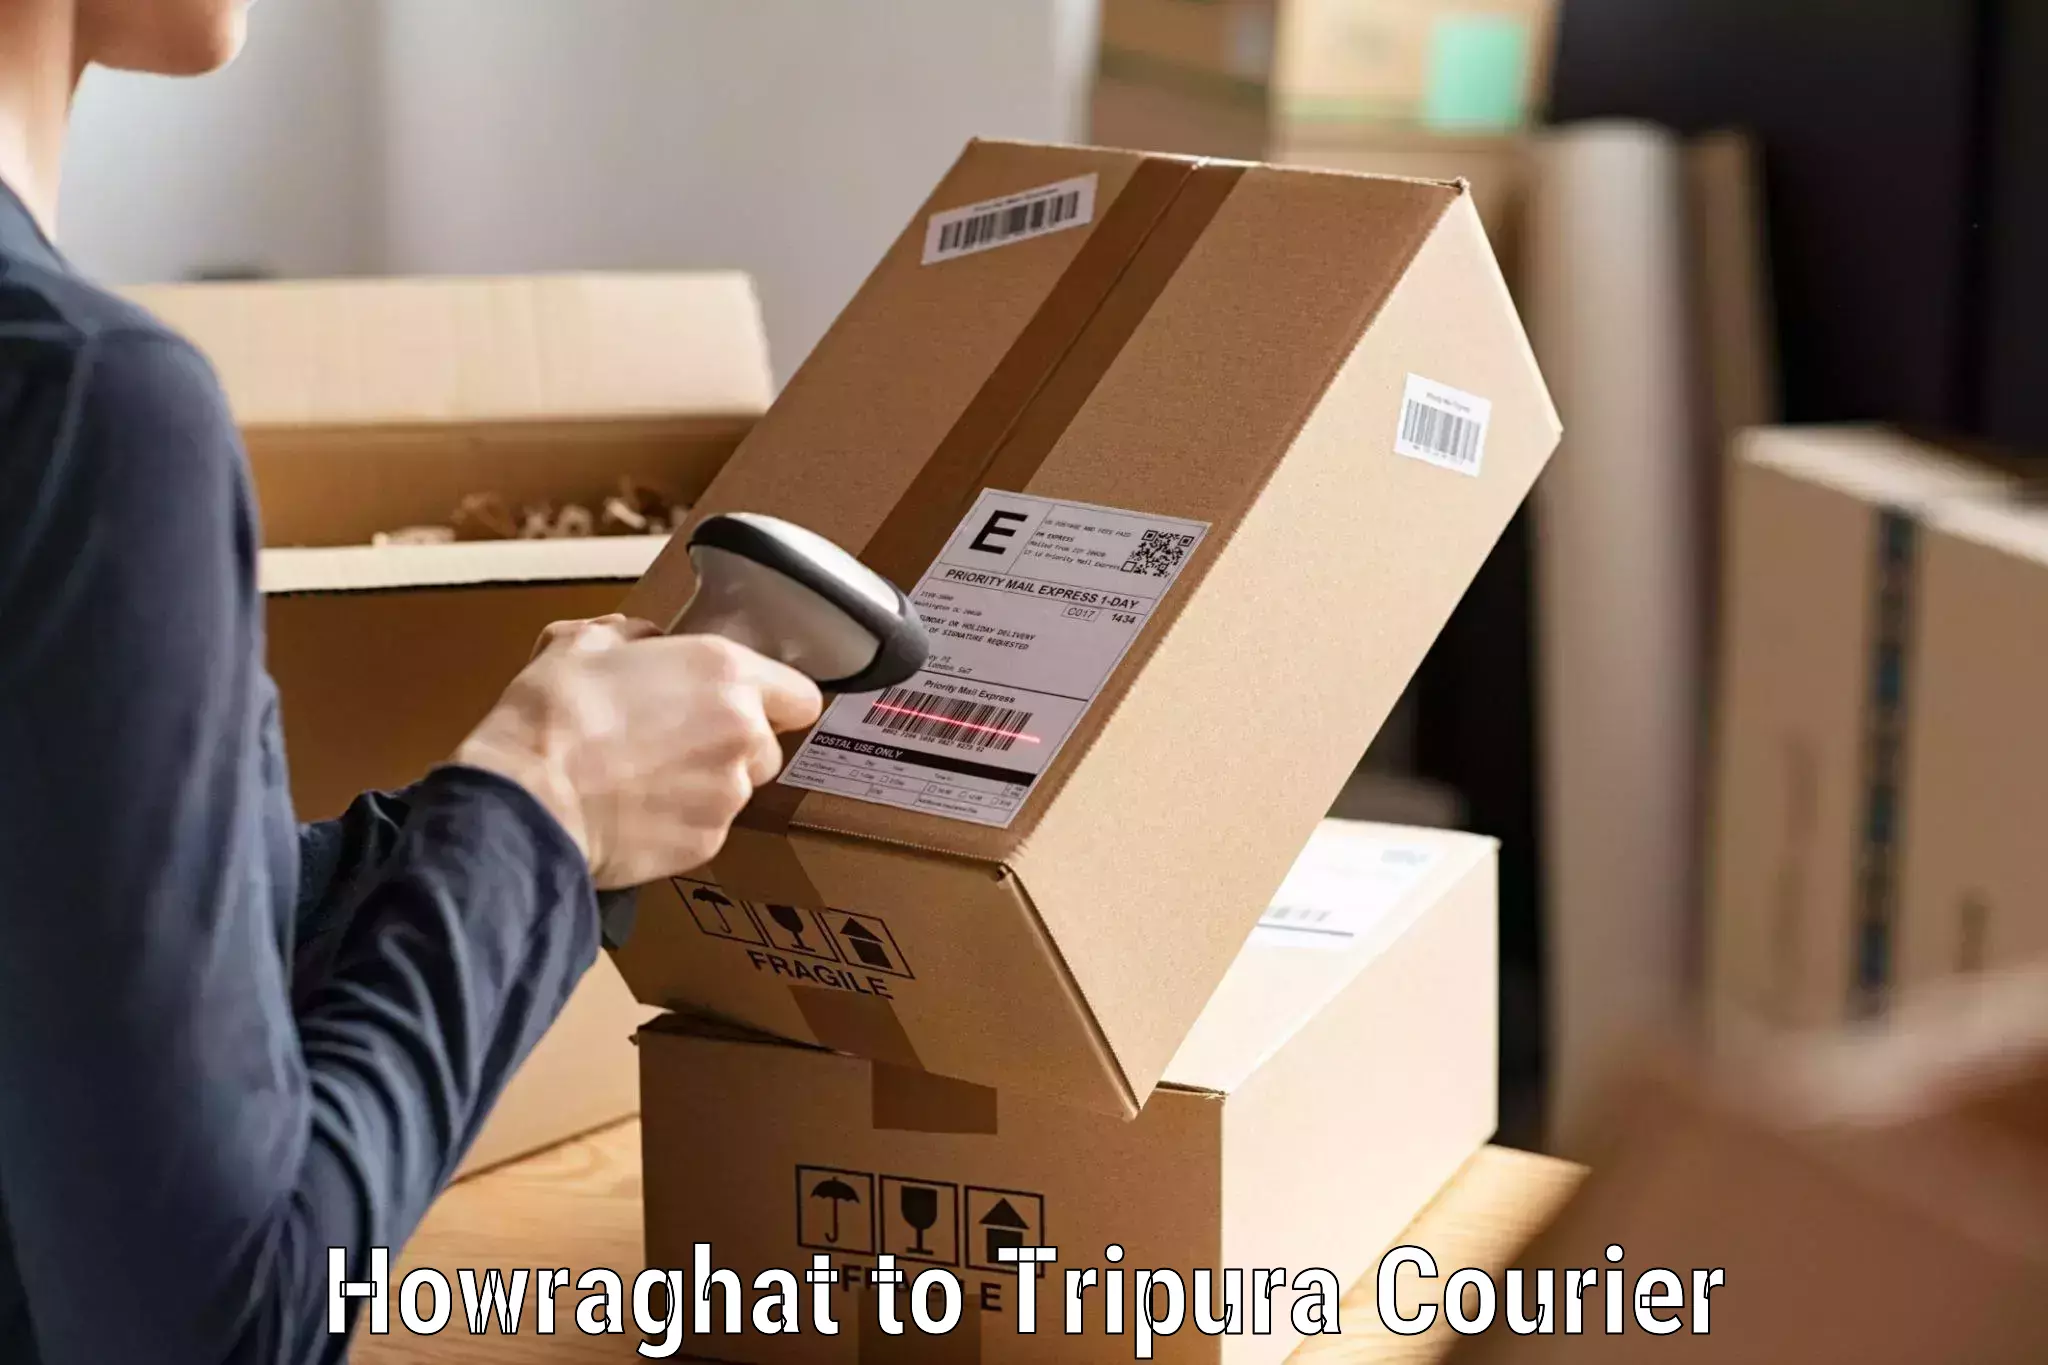 Business courier solutions Howraghat to Udaipur Tripura